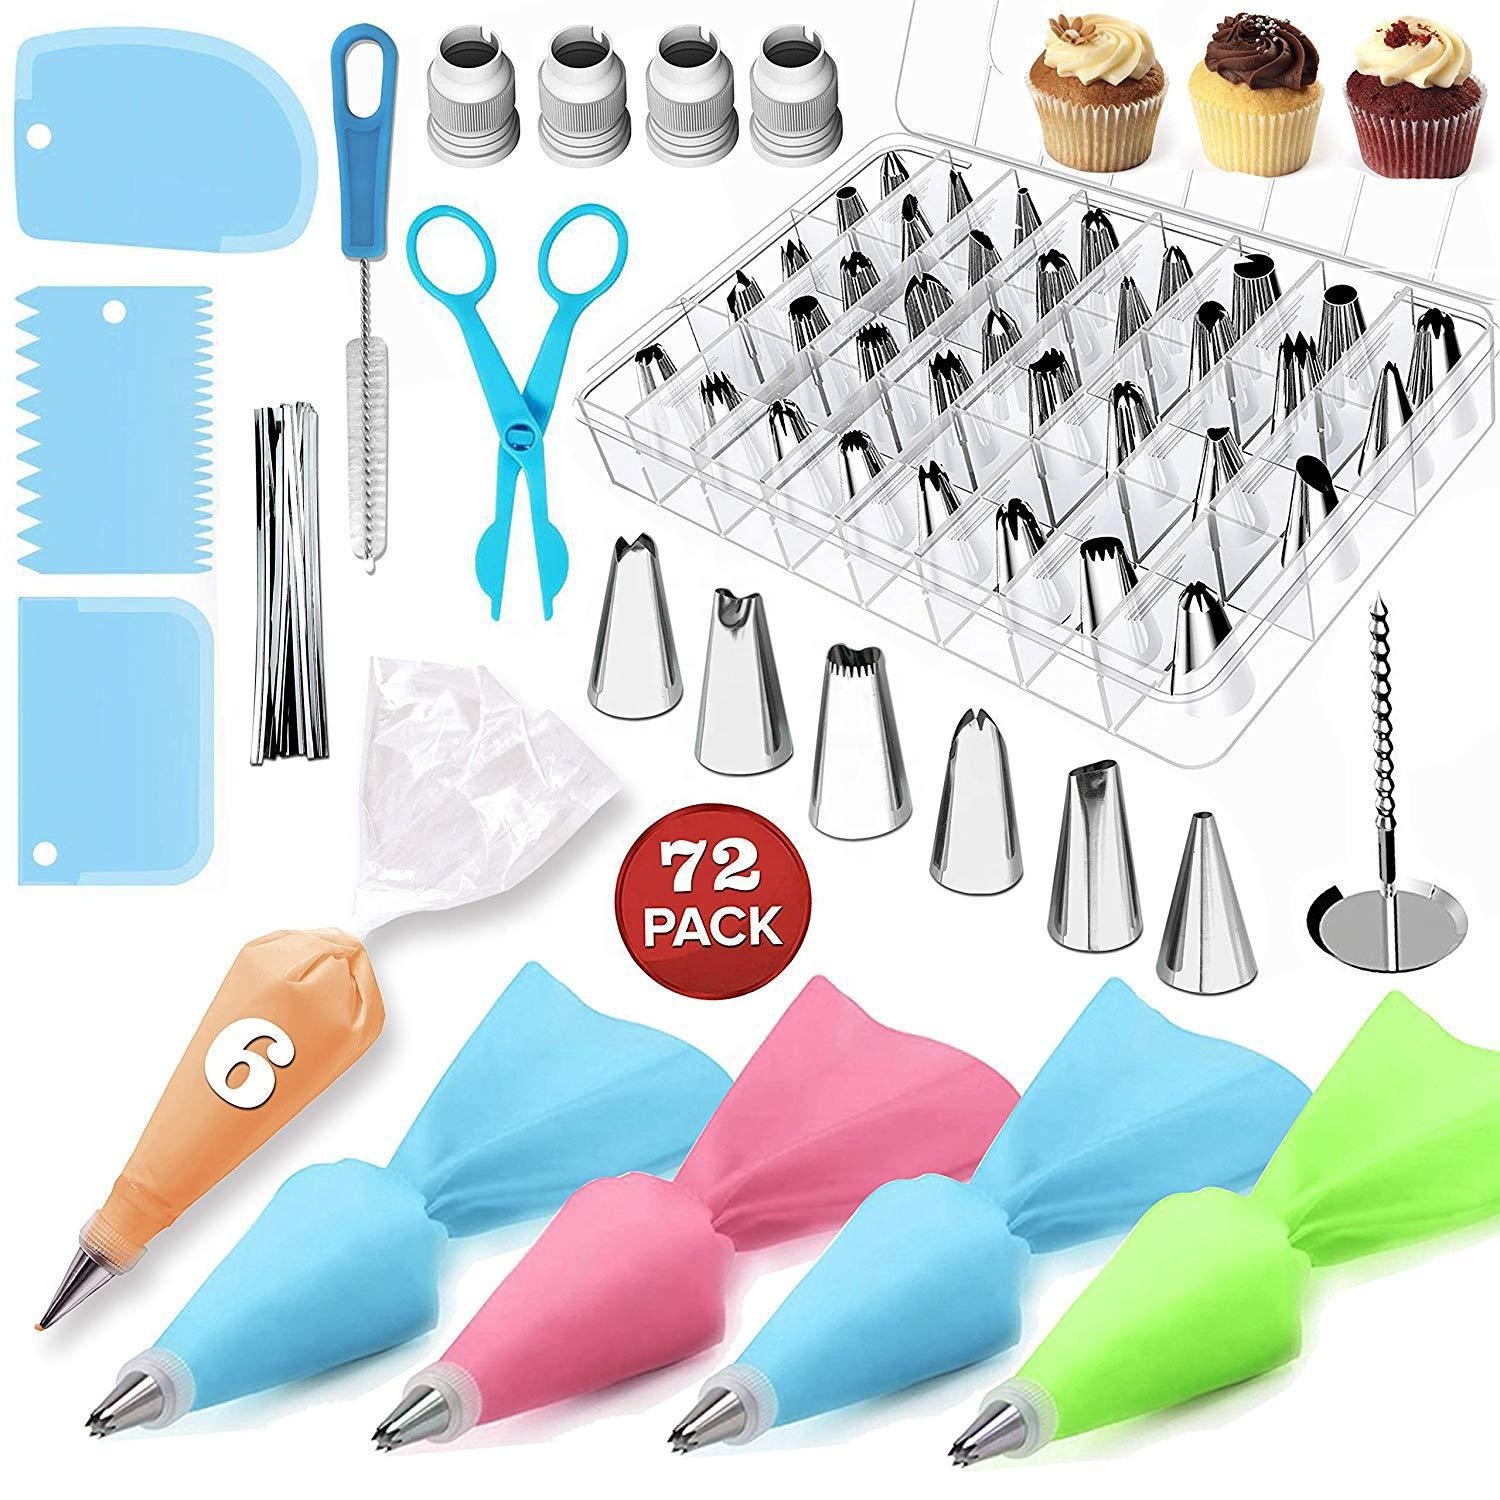 Piping Bags and Tips Set Cake Decorating Supplies for Baking 72